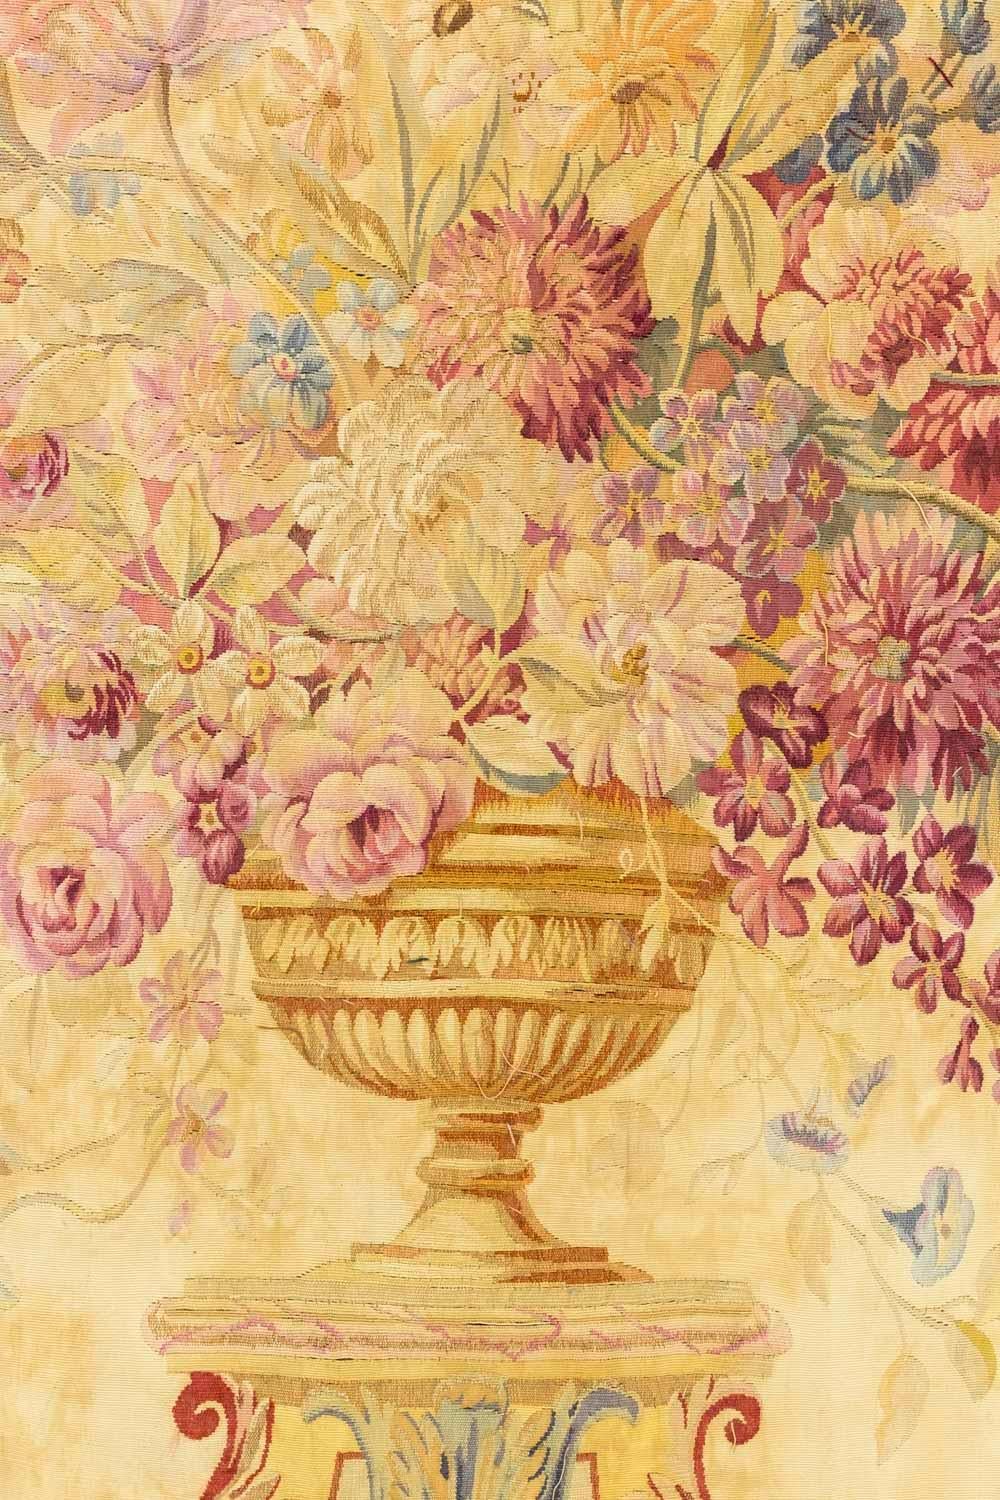 European Aubusson Tapestry with a Vase of Flowers, 19th Century